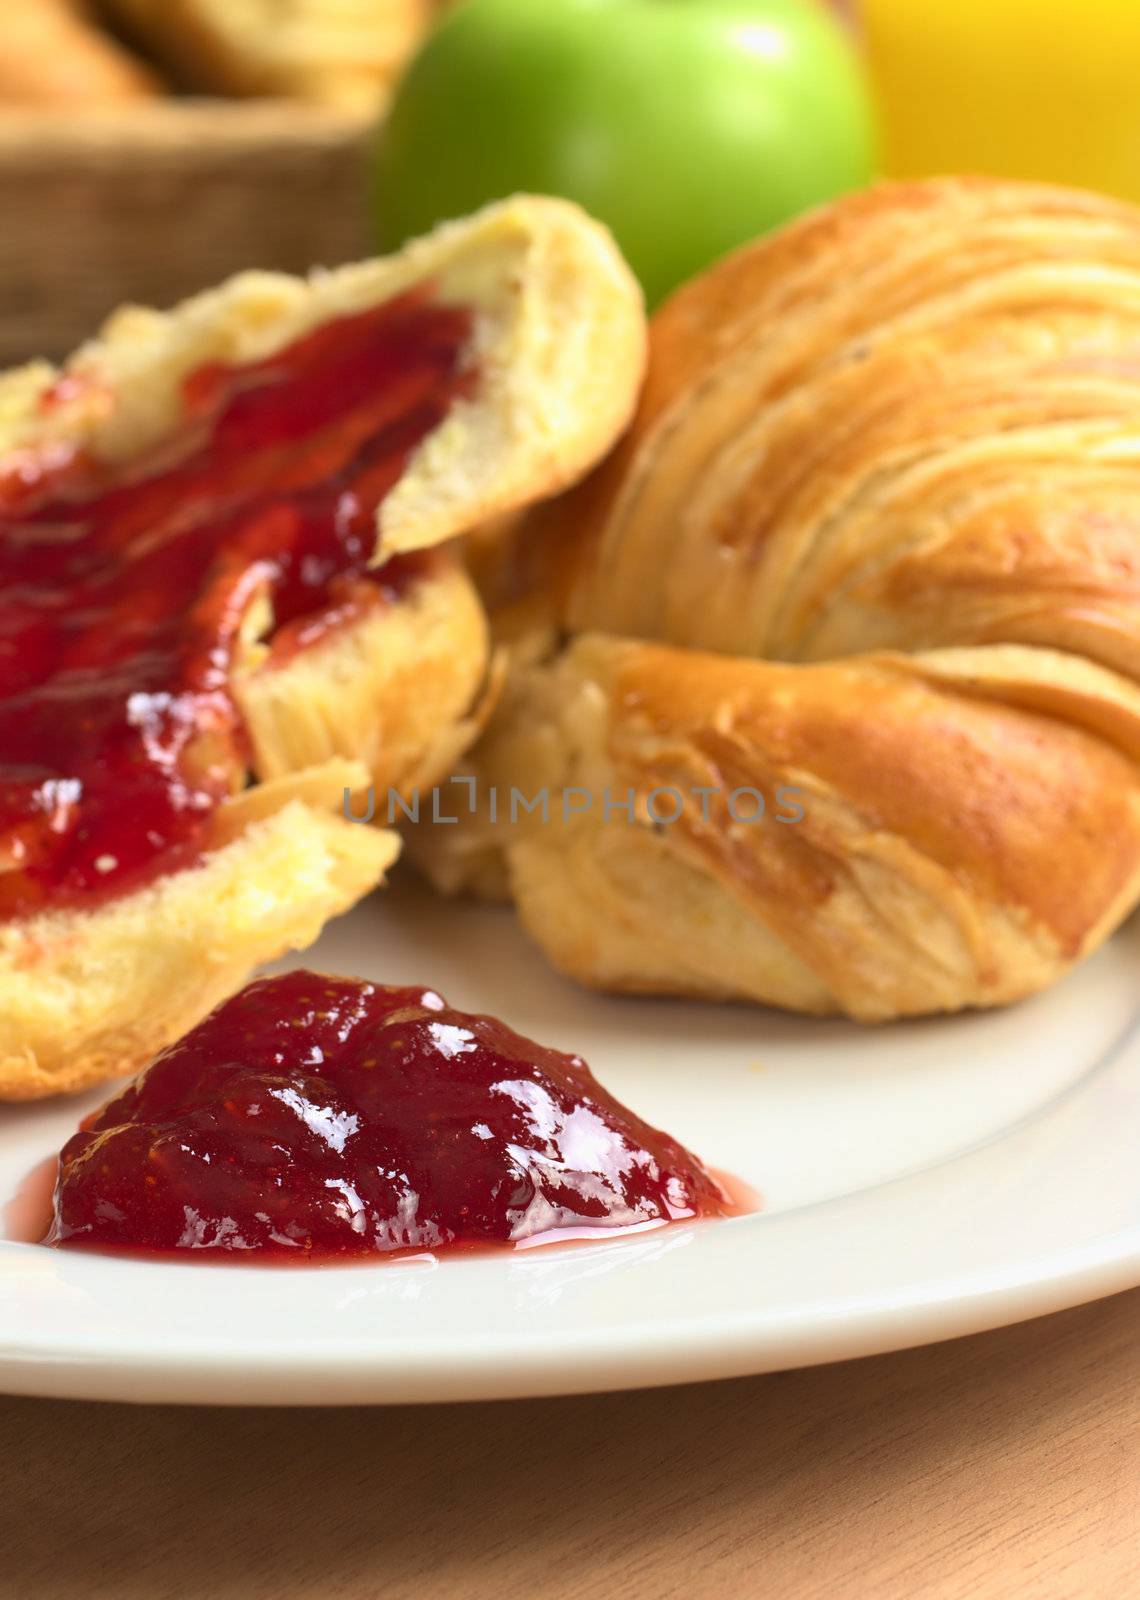 Strawberry jam on plate with croissant green apple and orange juice in the back (Selective Focus, Focus on the front of the jam pile)